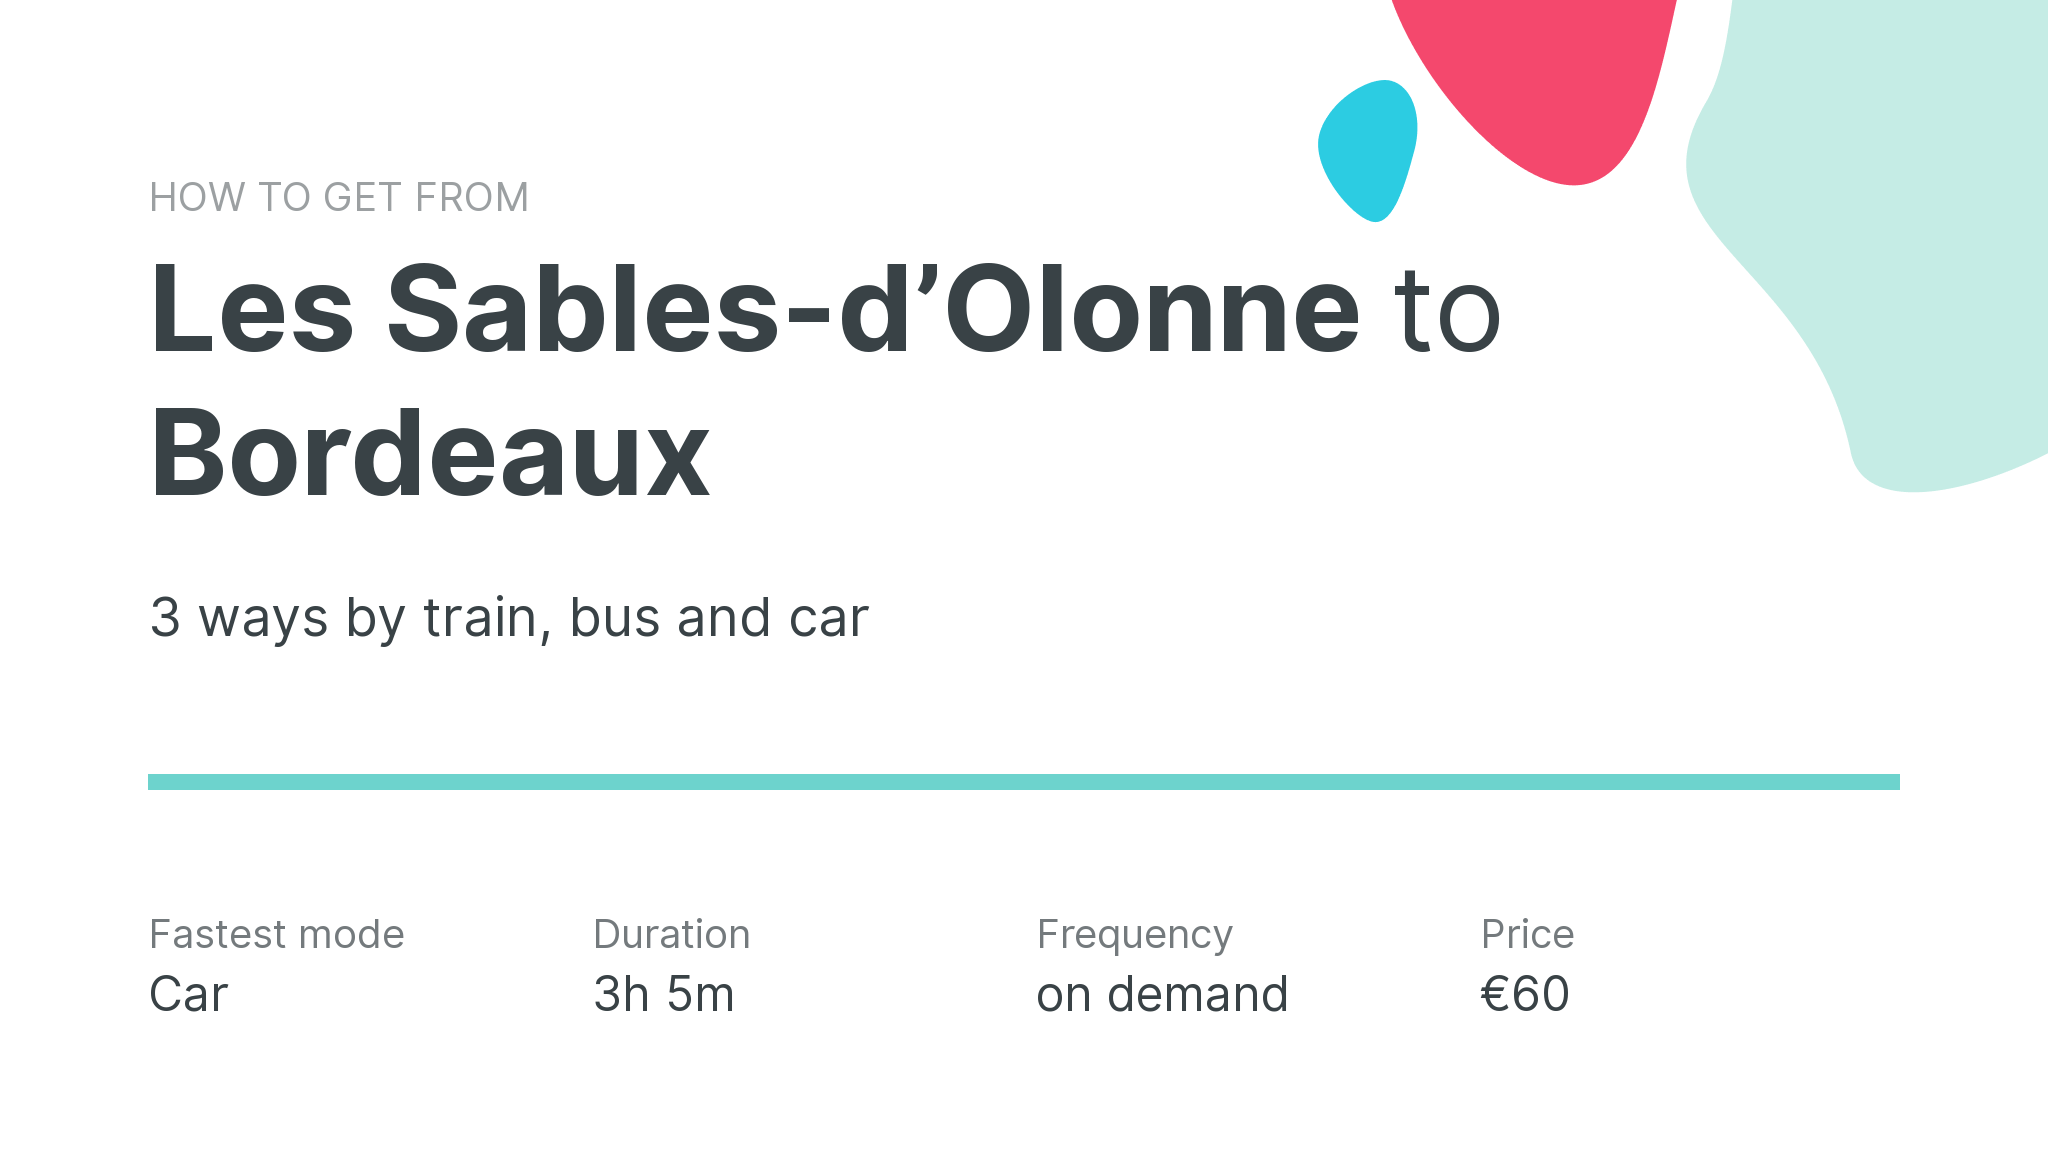 How do I get from Les Sables-dʼOlonne to Bordeaux